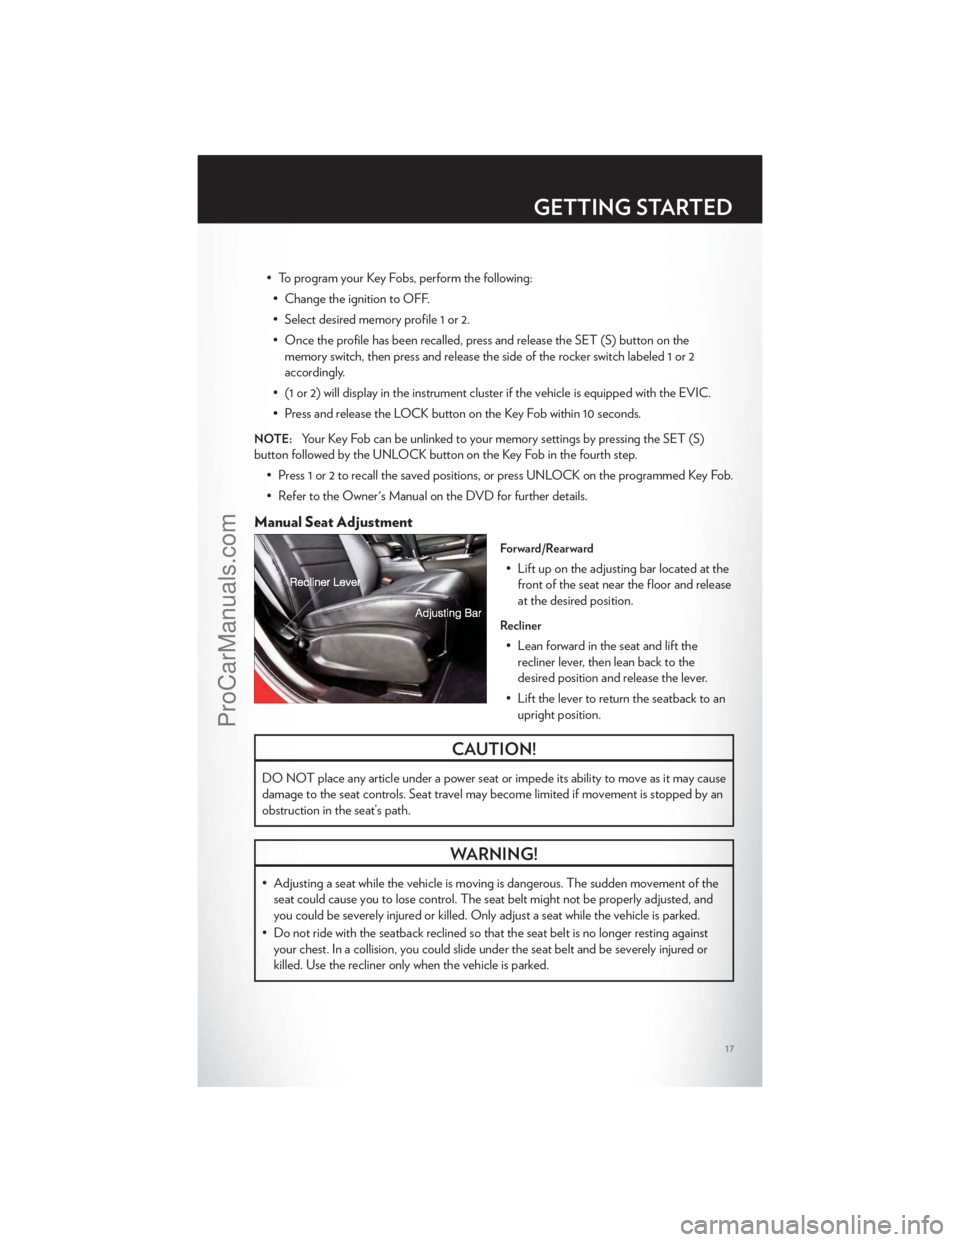 CHRYSLER 300 S 2012  Owners Manual • To program your Key Fobs, perform the following:• Change the ignition to OFF.
• Select desired memory profile 1 or 2.
• Once the profile has been recalled, press and release the SET (S) butt